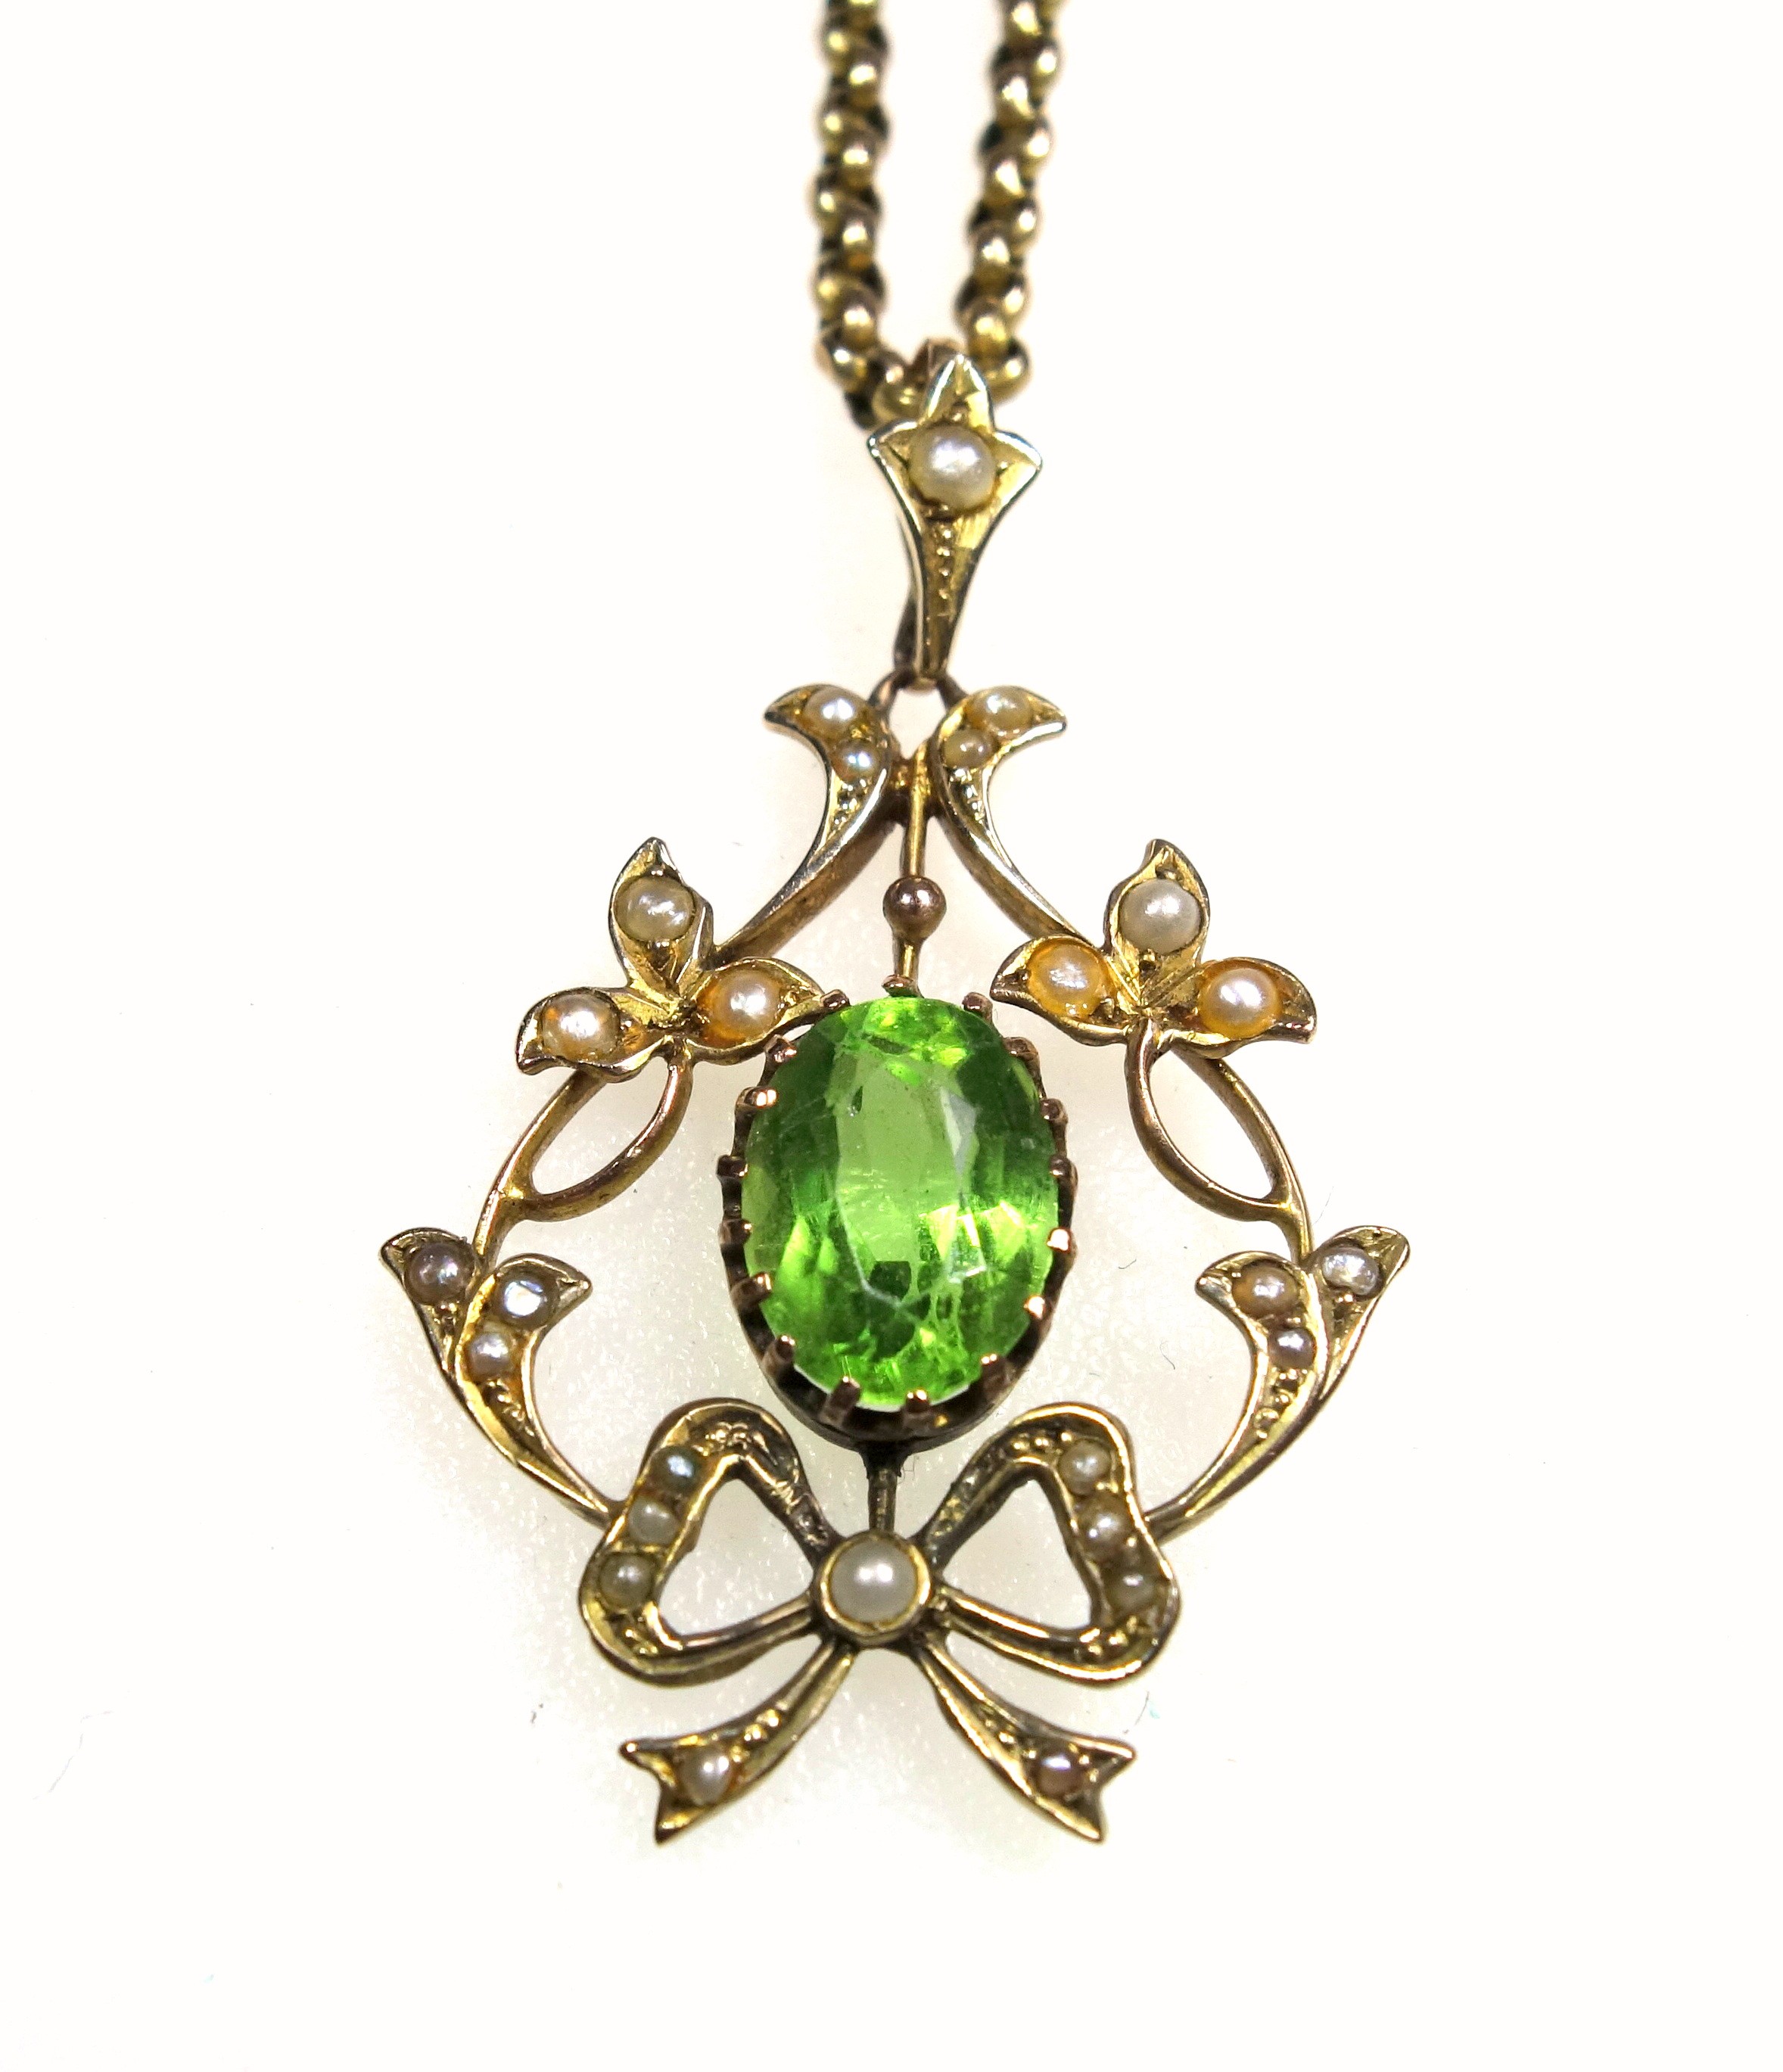 Edwardian 9ct gold belcher necklace with barrel clasp, L.39.5cm, with an openwork floral and - Image 3 of 3